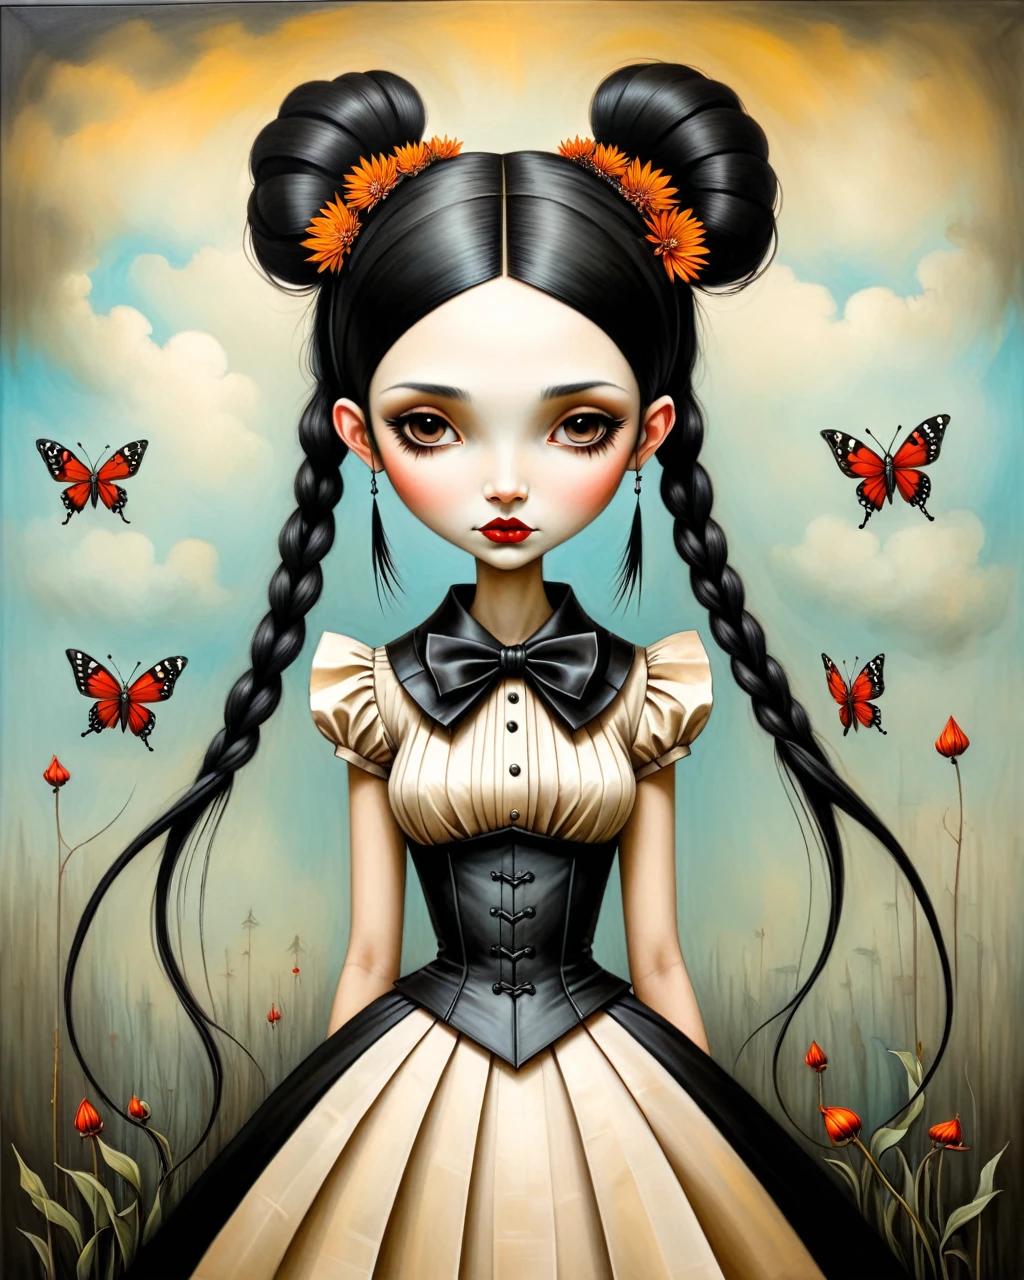 origami style in the style of esao andrews,esao andrews style,esao andrews art,esao andrewsa painting of a girl gothic wednesday addams pale black hair two braids style of esao andrews, andrews esao artstyle, inspired by Esao Andrews, esao andrews ornate, by Esao Andrews, esao andrews, inspired by ESAO, by ESAO,  earley, shrubs and flowers esao andrews, benjamin lacombe, 1girl, bug in the style of esao andrews, esao andrews . paper art, pleated paper, folded, origami art, pleats, cut and fold, centered composition